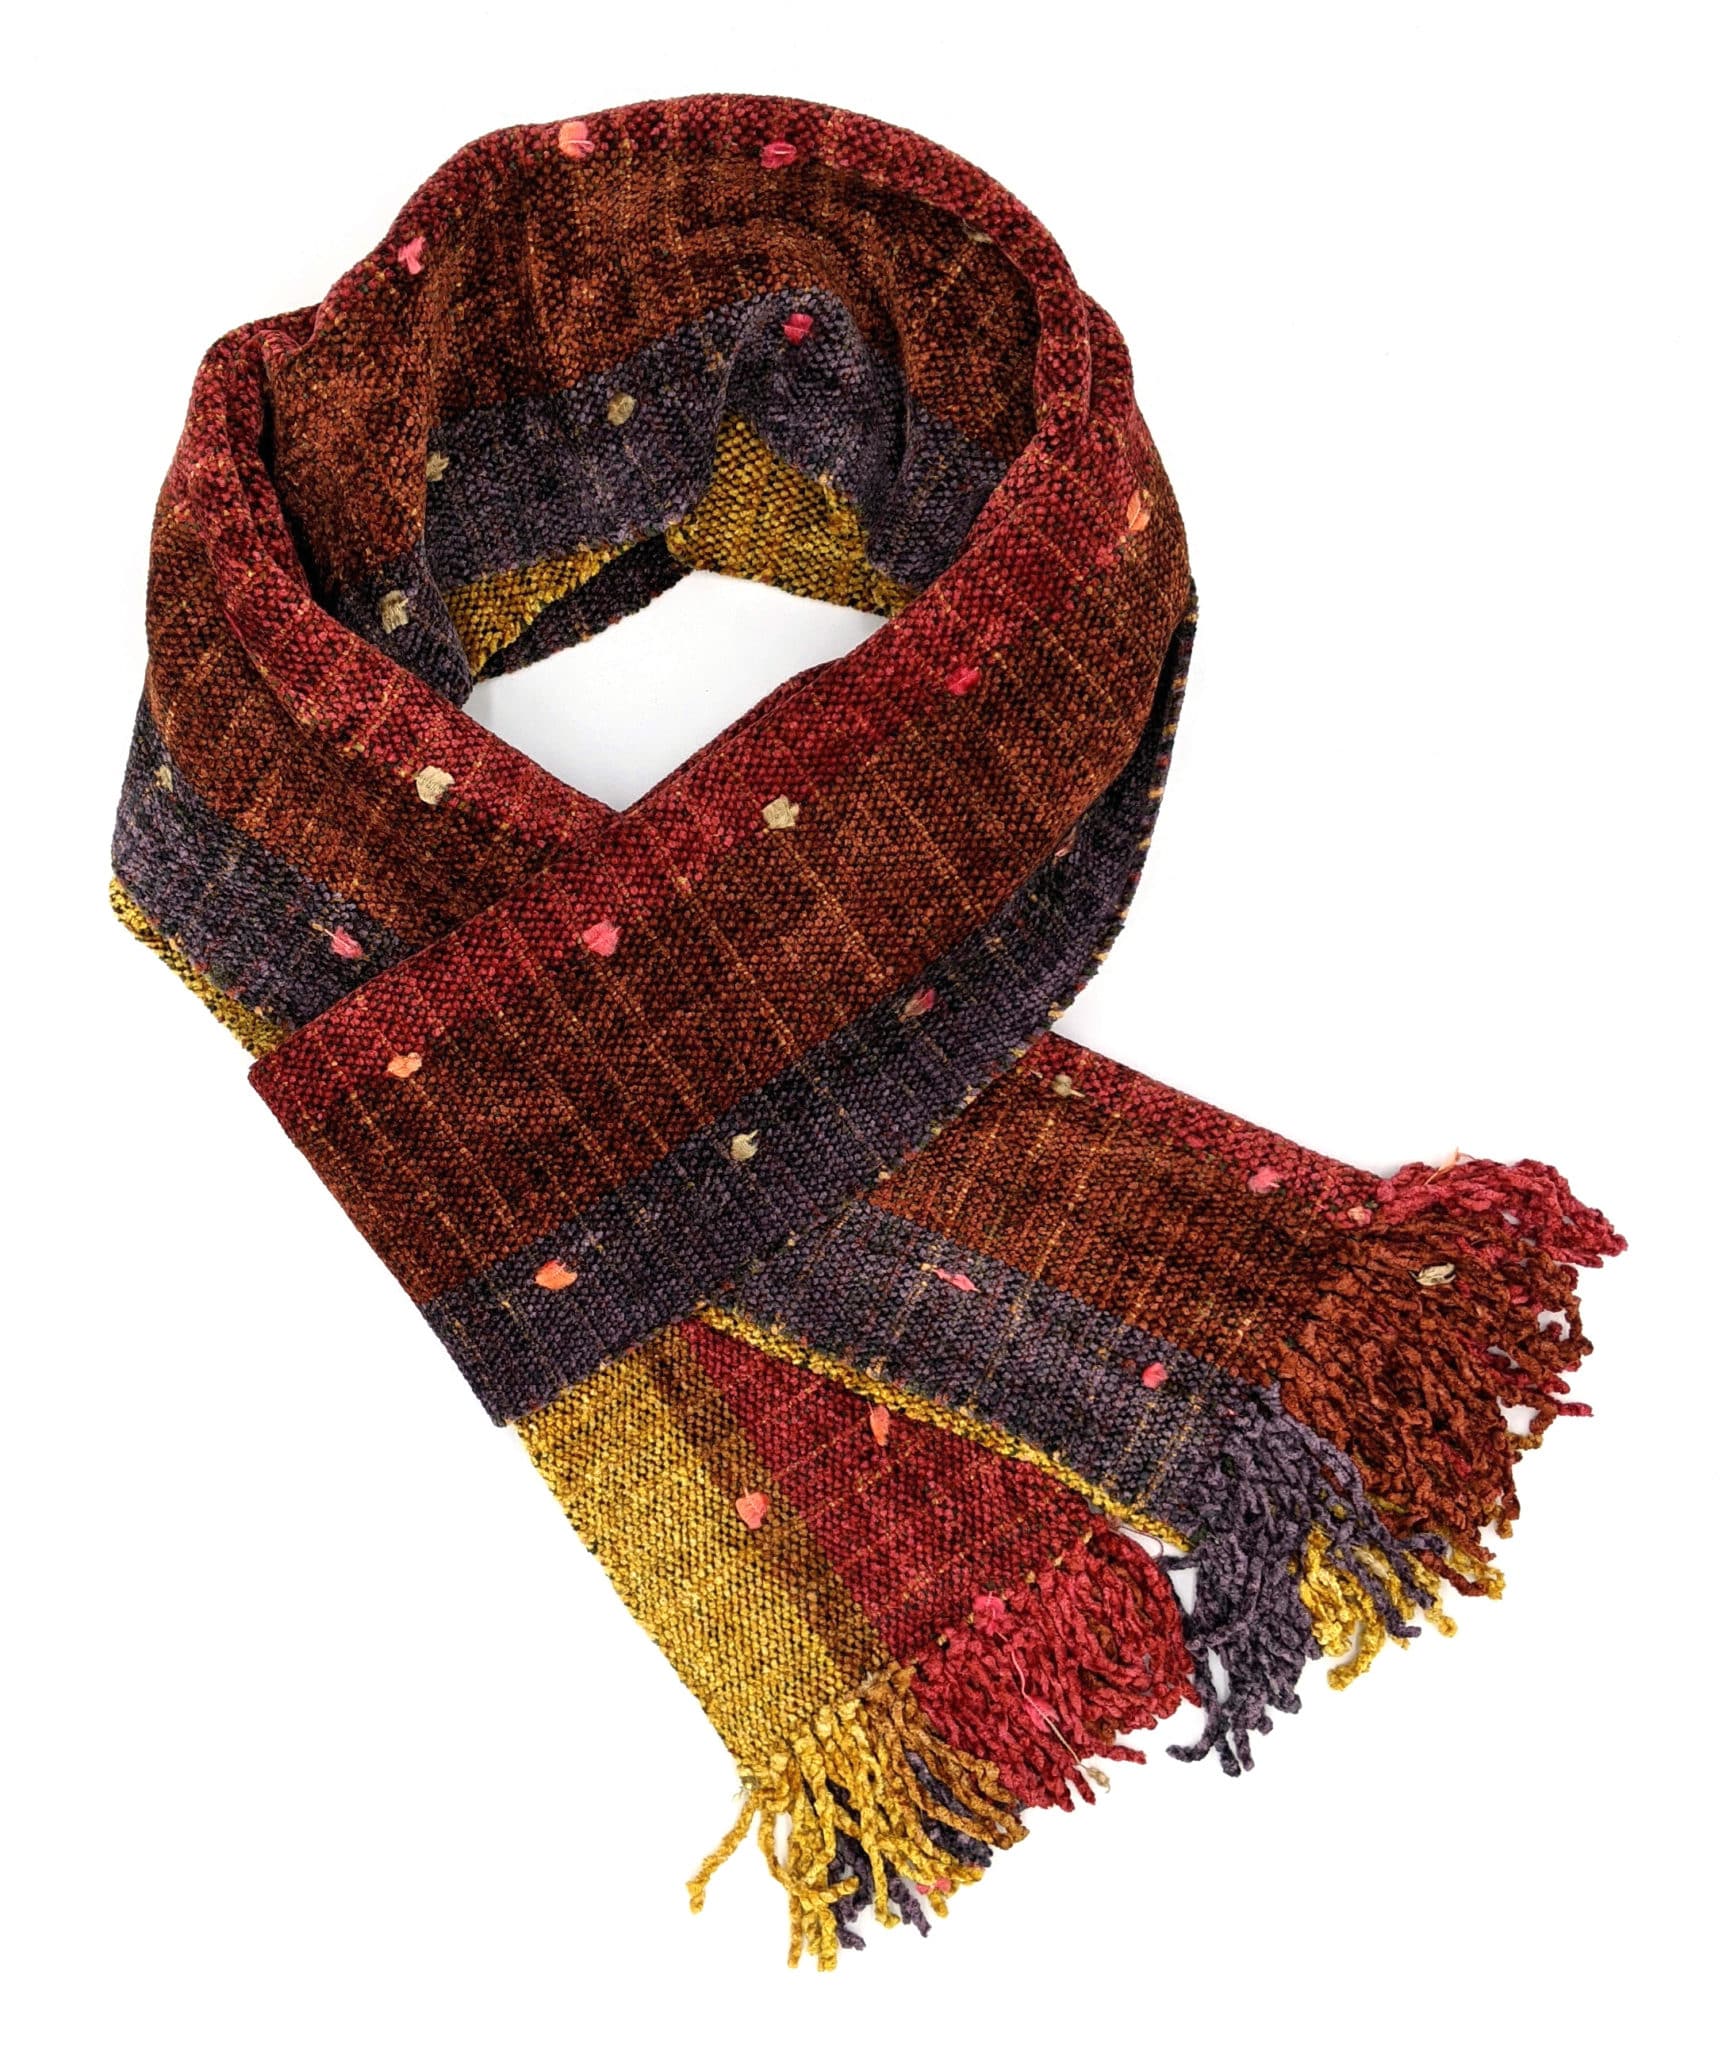 Purple, Cinnamon, Red, Coffee, and Gold Stripes with Ornamental Yarn and Space-Dyed Autumn Warp  - Bamboo Chenille Handwoven Scarf 8 x 68